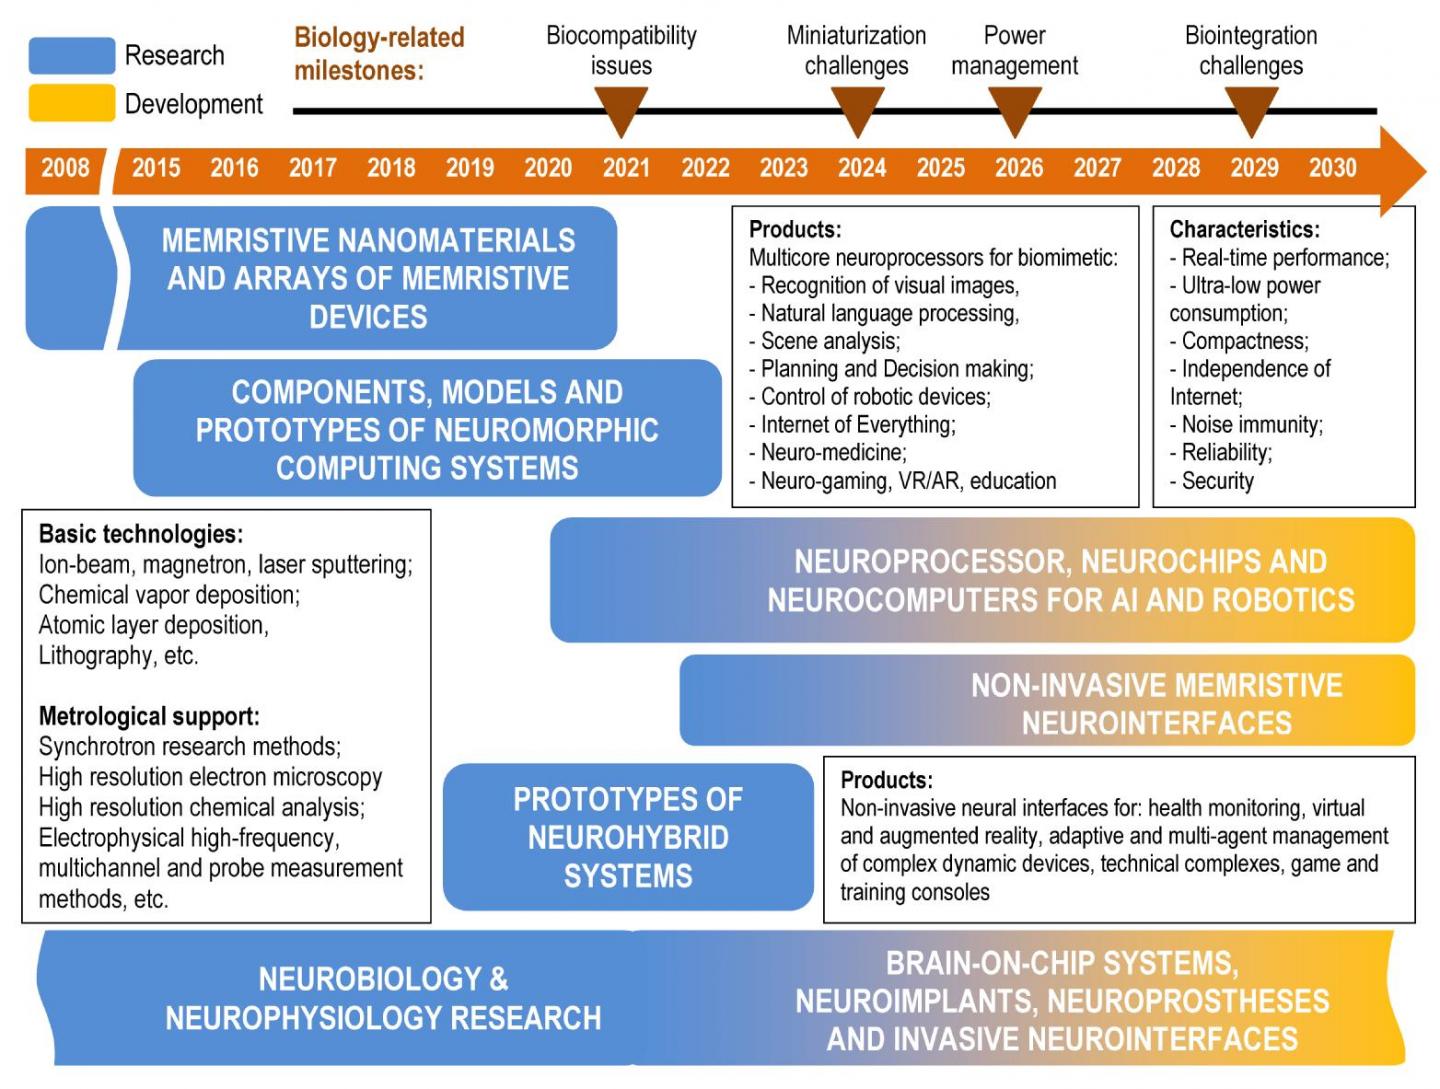 FIG. 2   |    Roadmap for memristive neuromorphic and neurohybrid systems